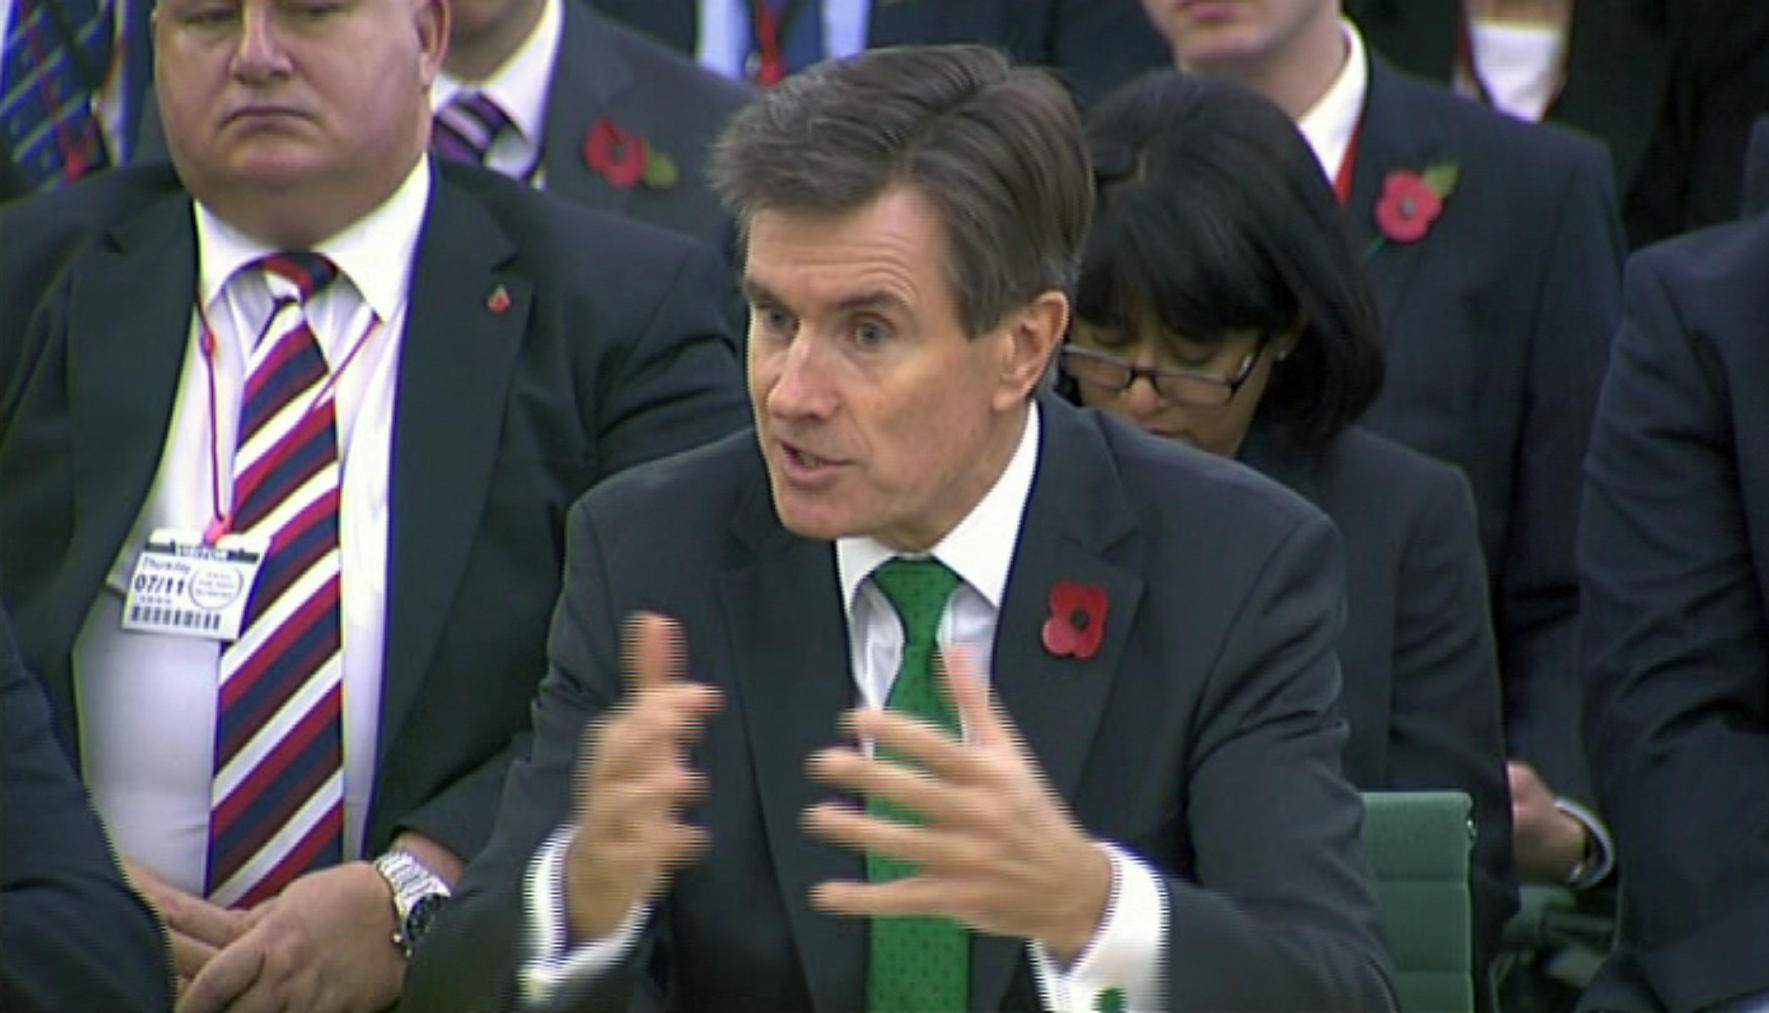 John Sawers, head of Britain's foreign spy service MI6, during the precedented joint public appearance for the three spy chiefs. Photo: AP